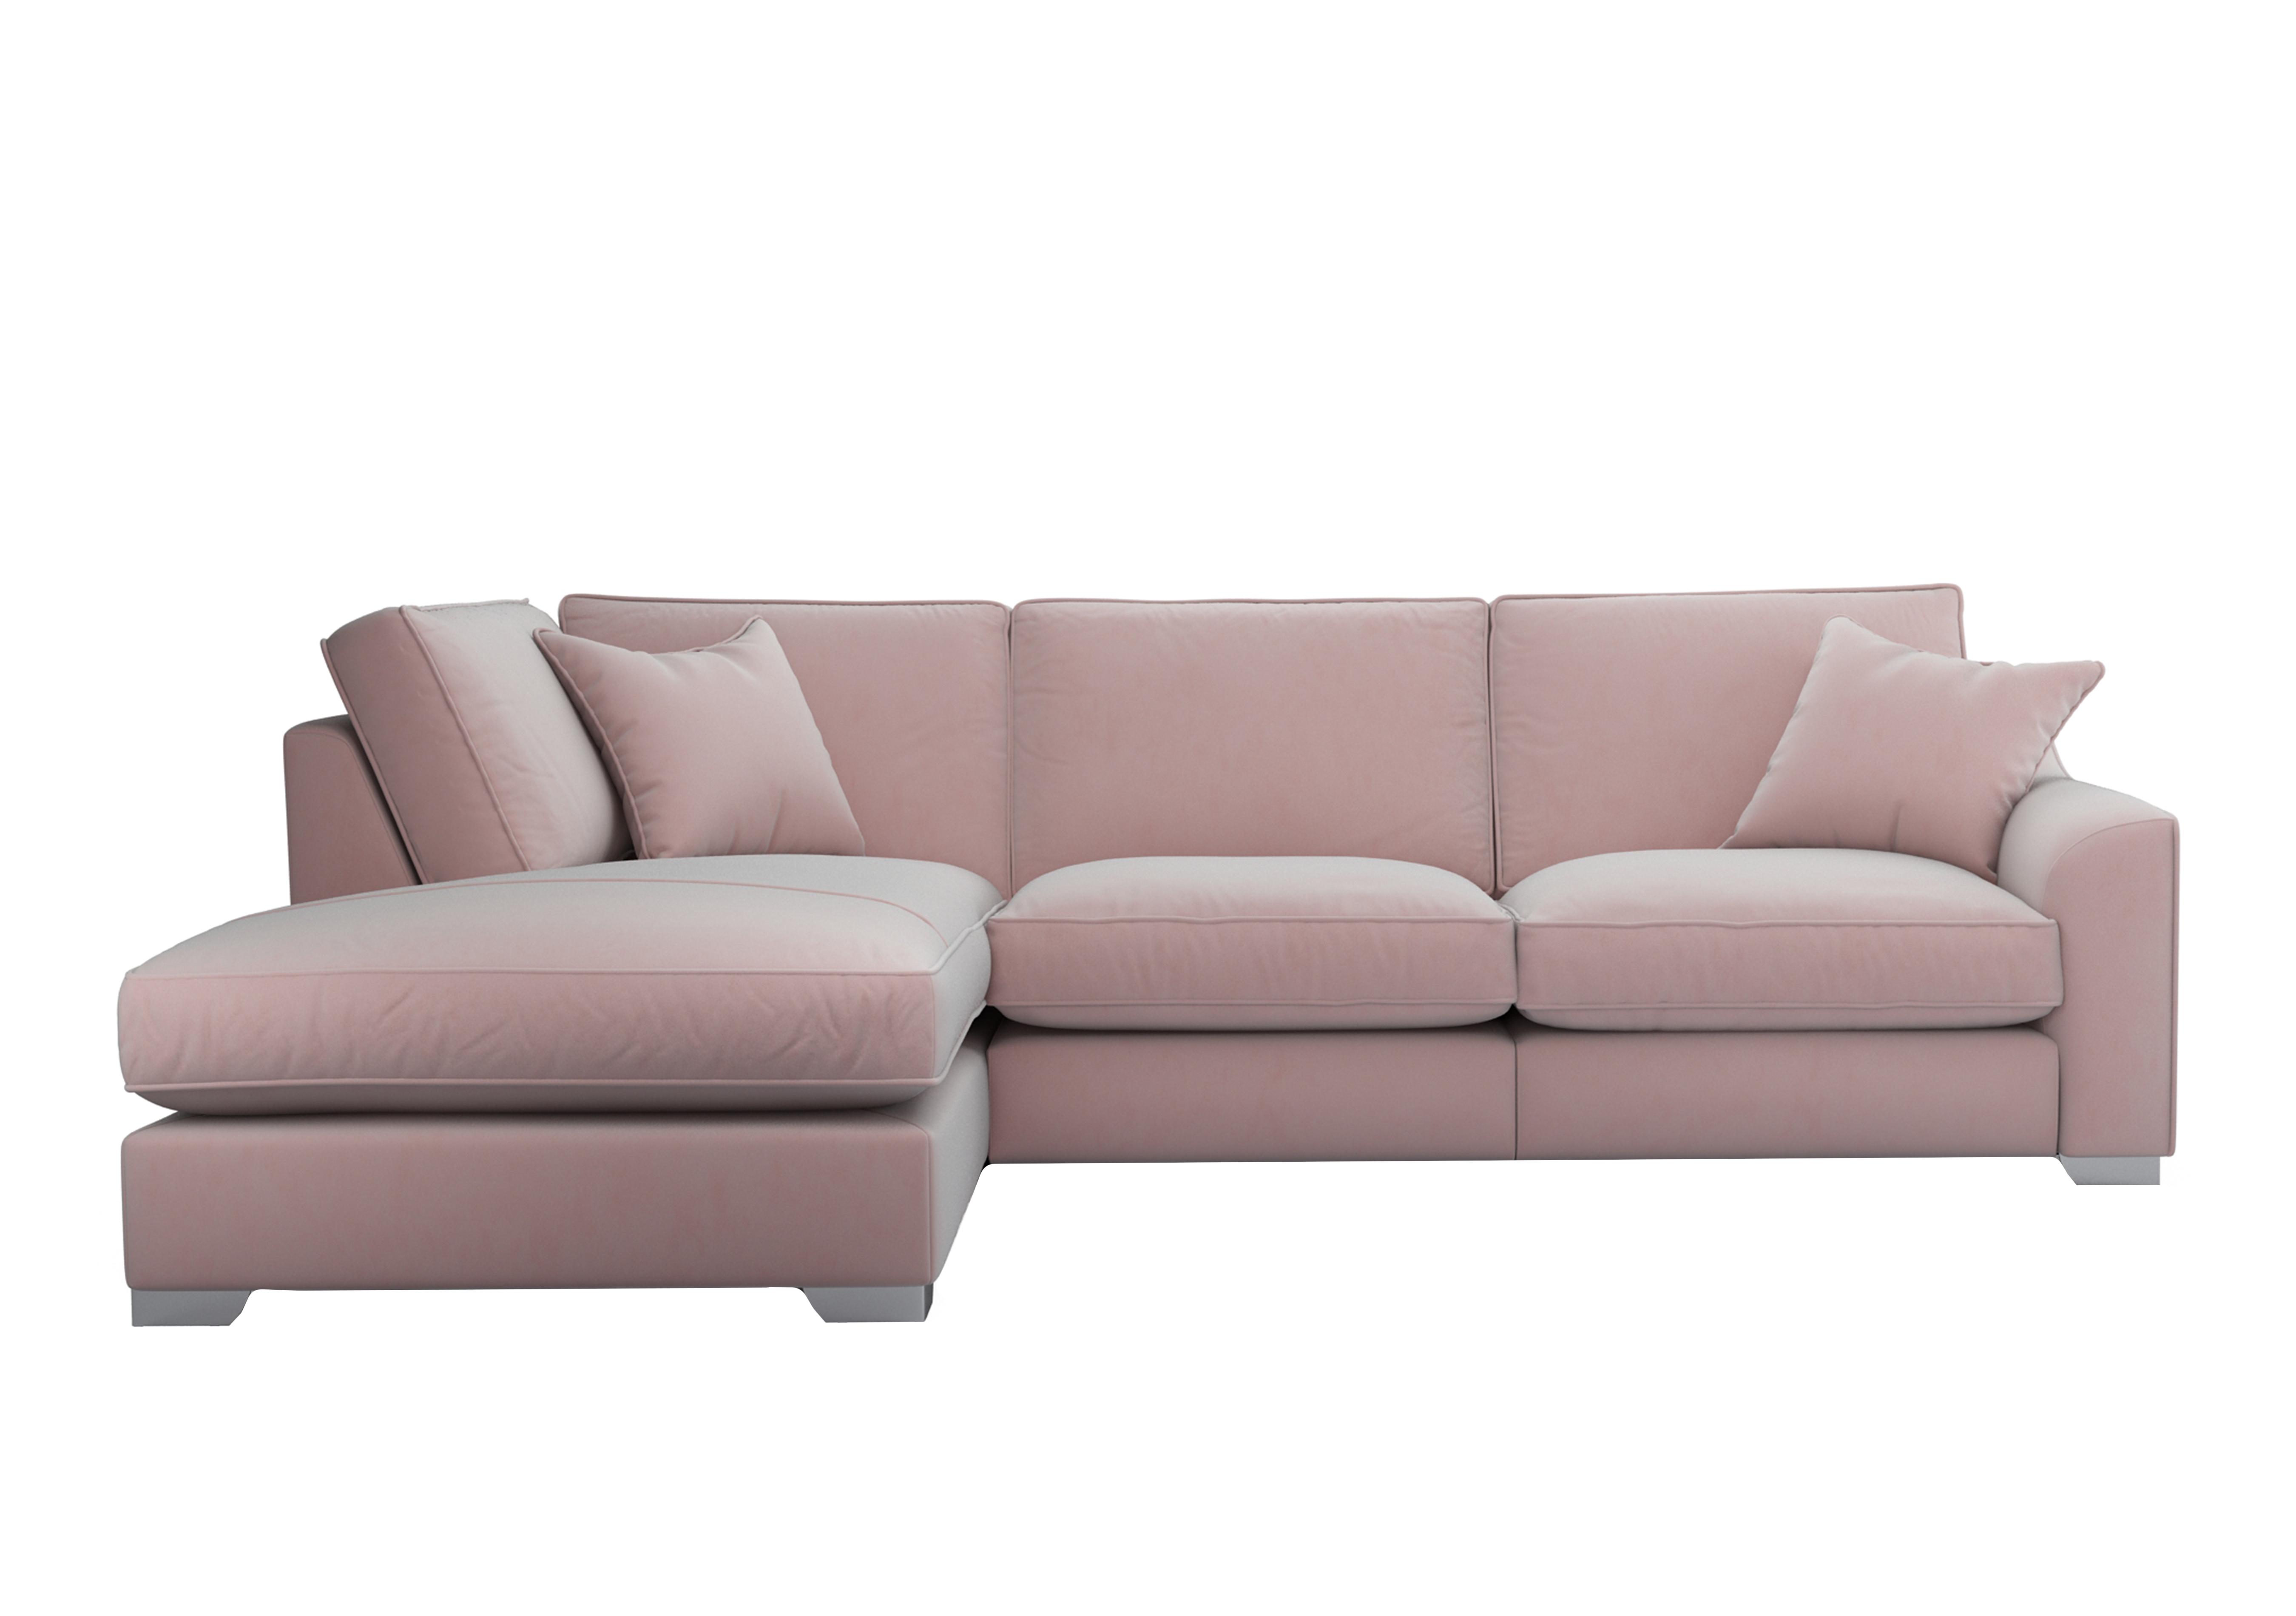 Isobel Fabric Corner Sofa with Chaise End in Cot256 Cotton Candy Ch Ft on Furniture Village